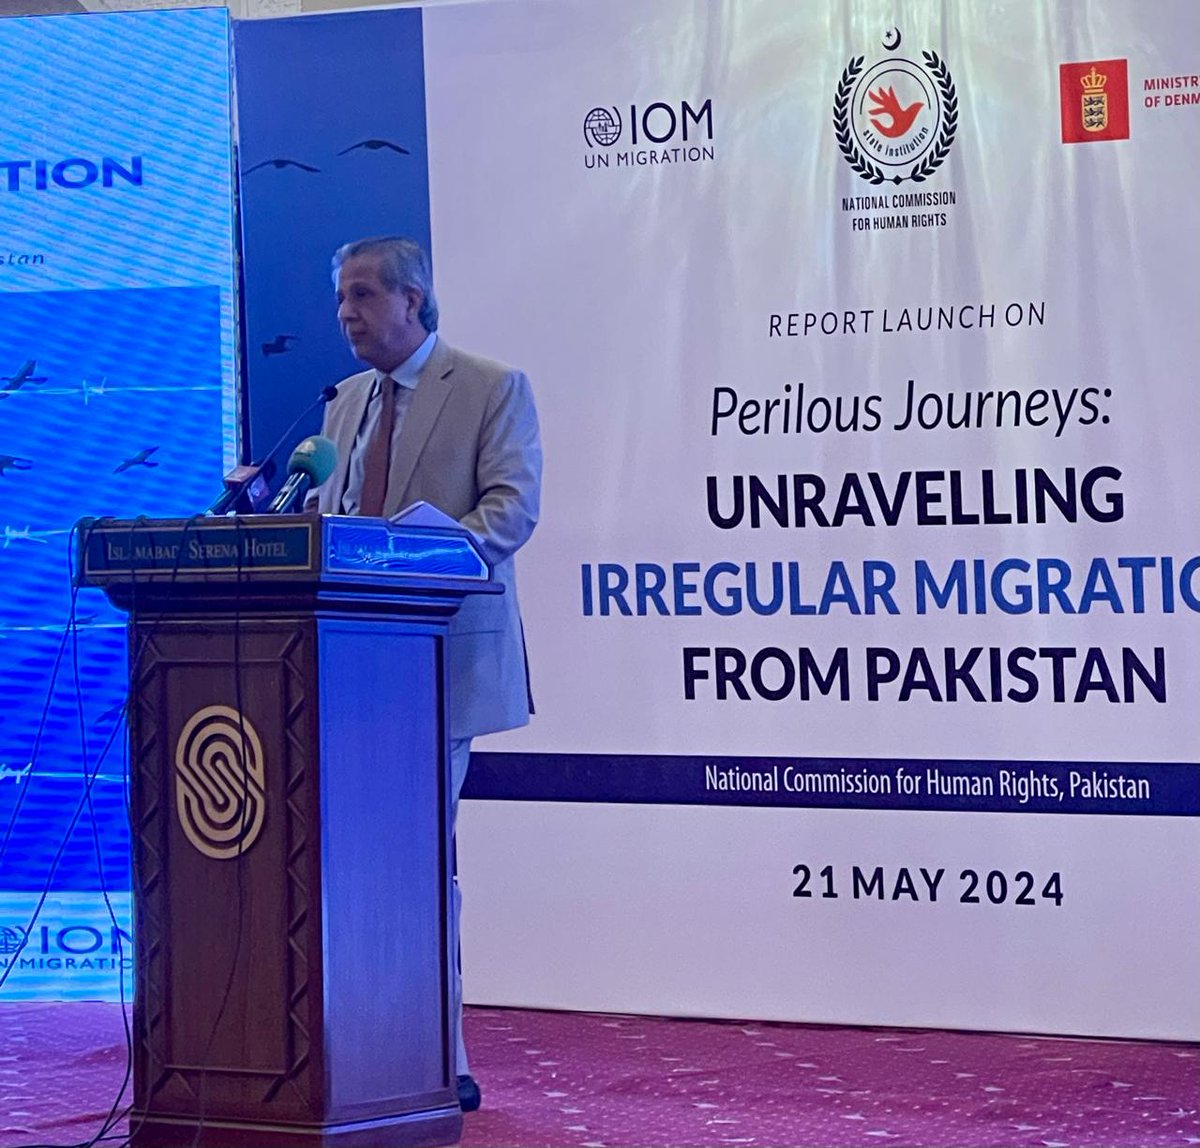 Chief Guest Azam Nazeer Tarar (Federal Minister of Law and Justice) commends NCHR's #PerilousJourneys report for addressing the serious global humanitarian issue of irregular migration. @RabiyaJaveri